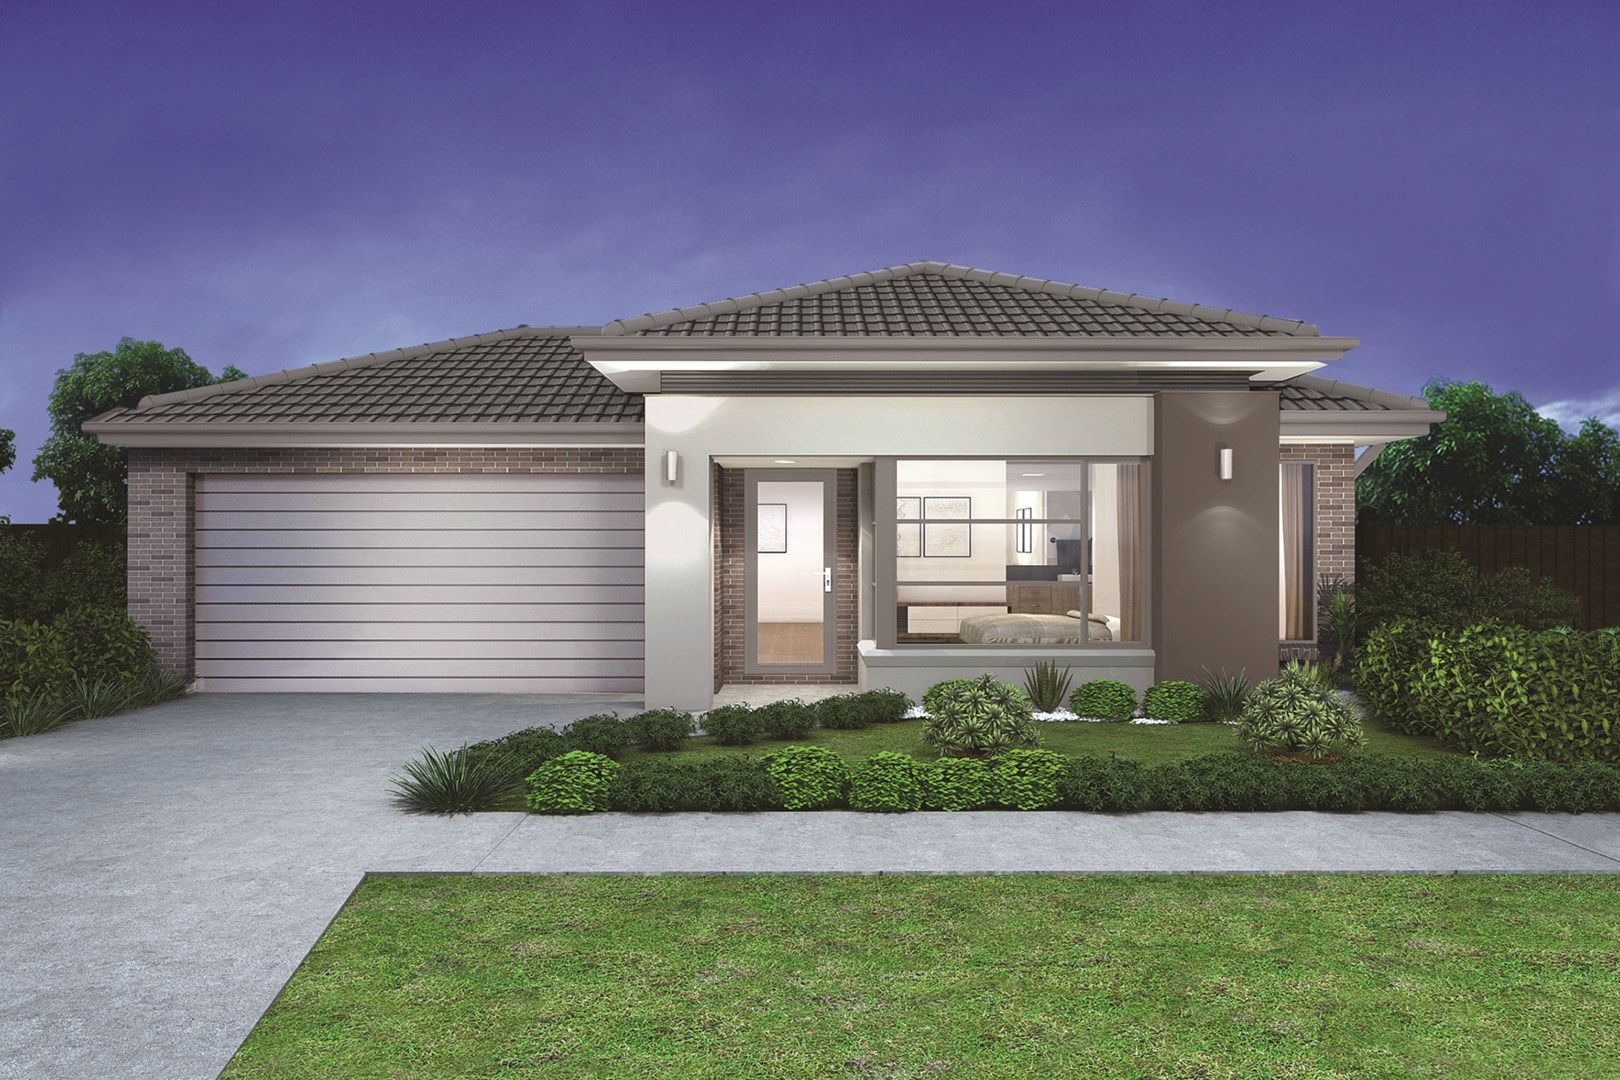 4 bedrooms New House & Land in 1152 Romanseqe Street DEANSIDE VIC, 3336